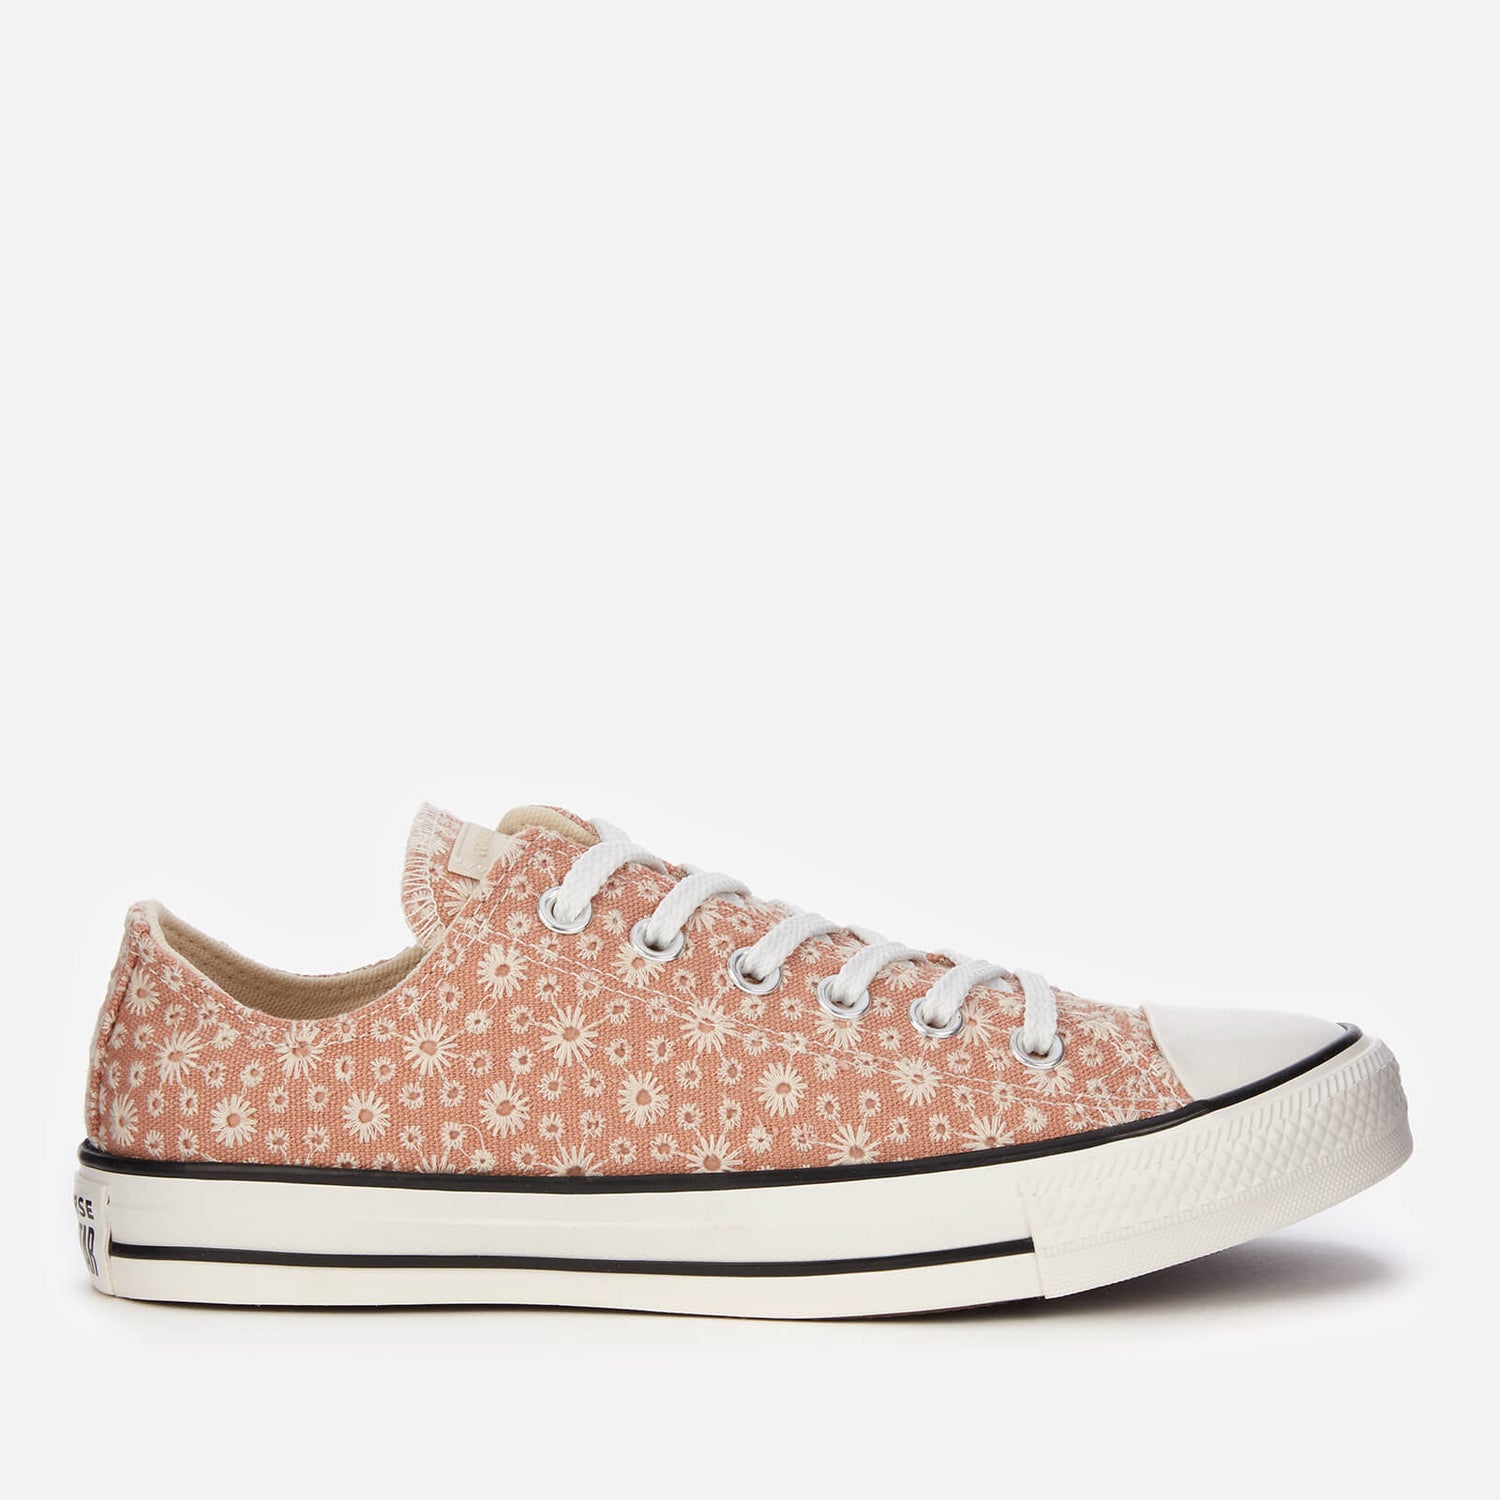 Converse Women's Chuck Taylor All Star Ox Trainers - Vachetta Beige/Natural Ivory/Vintage White